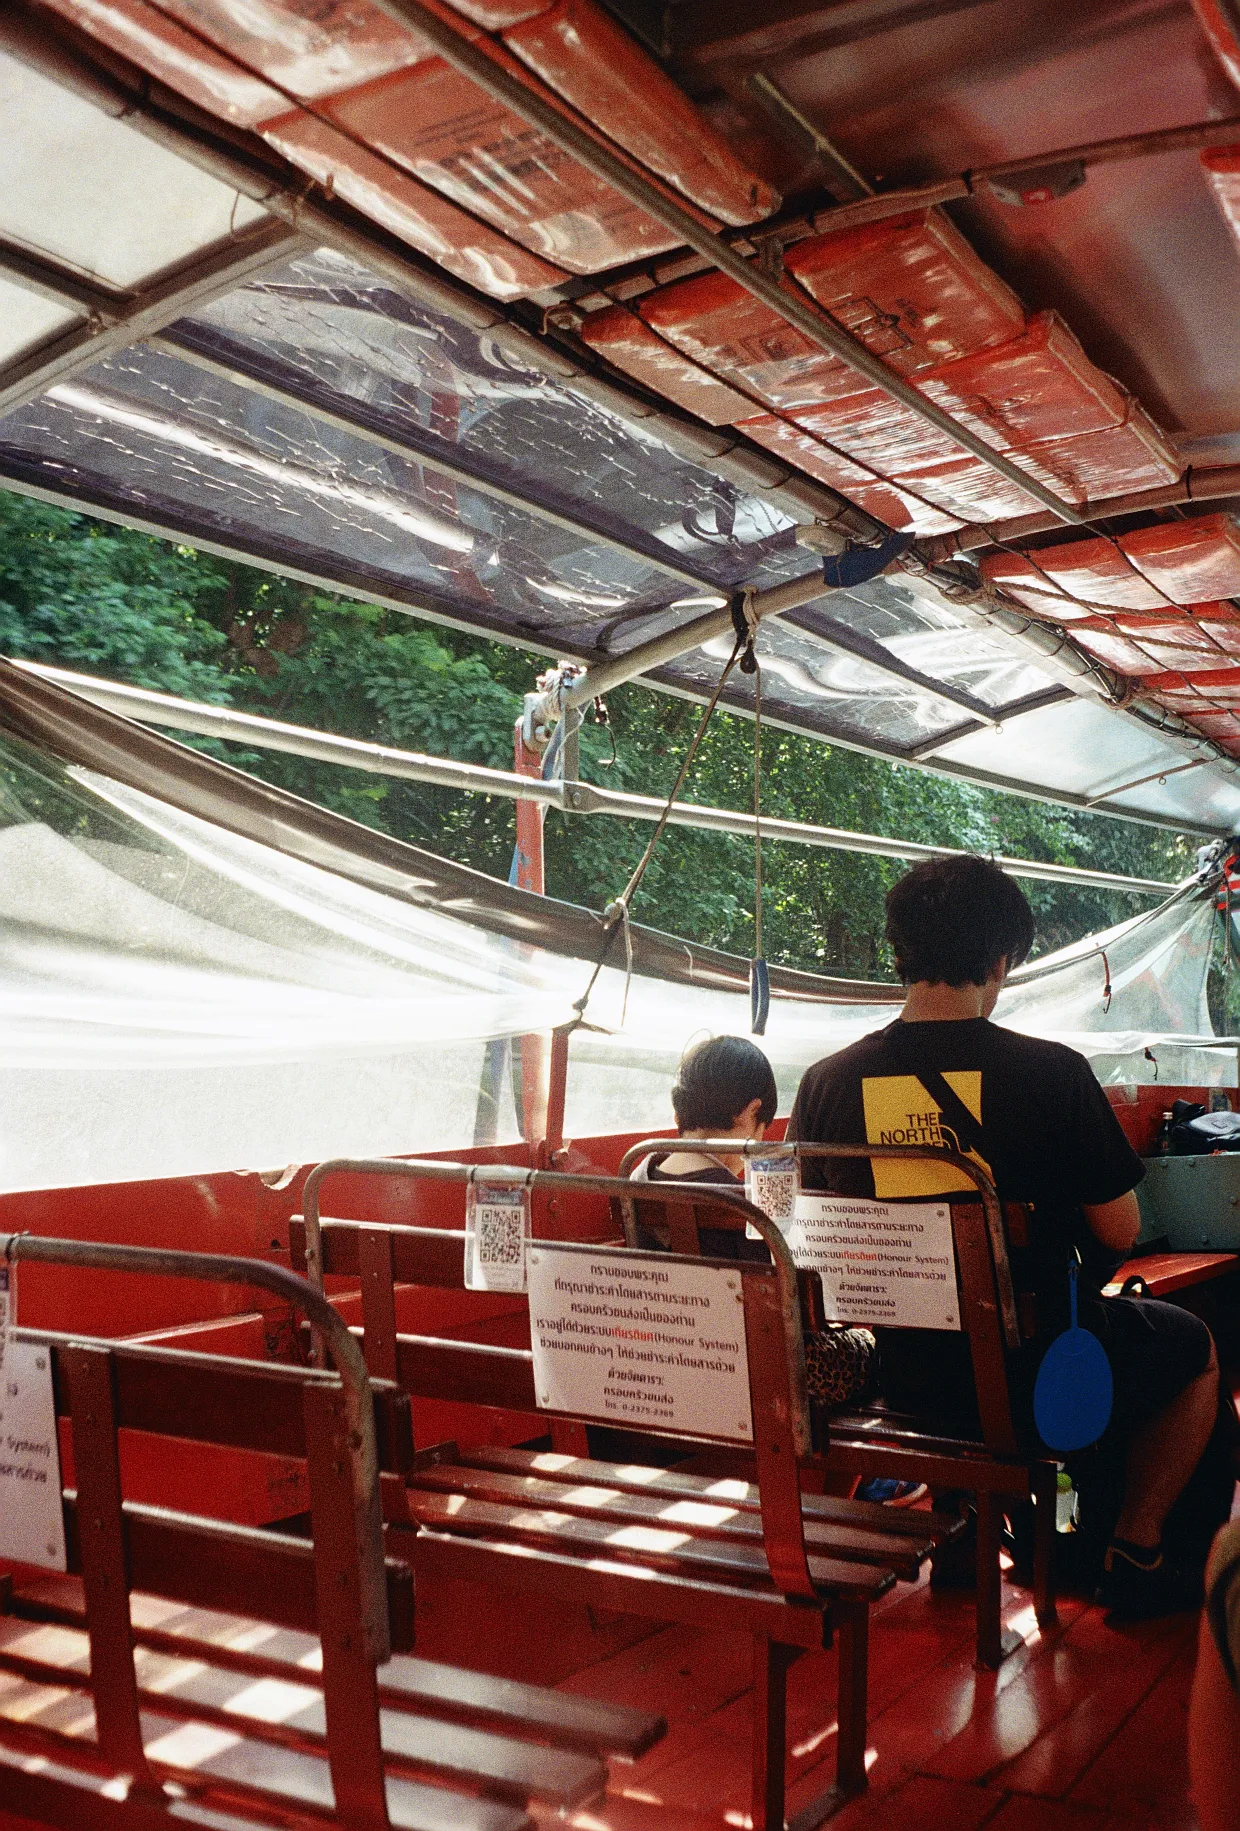 On a river bus in Bangkok.